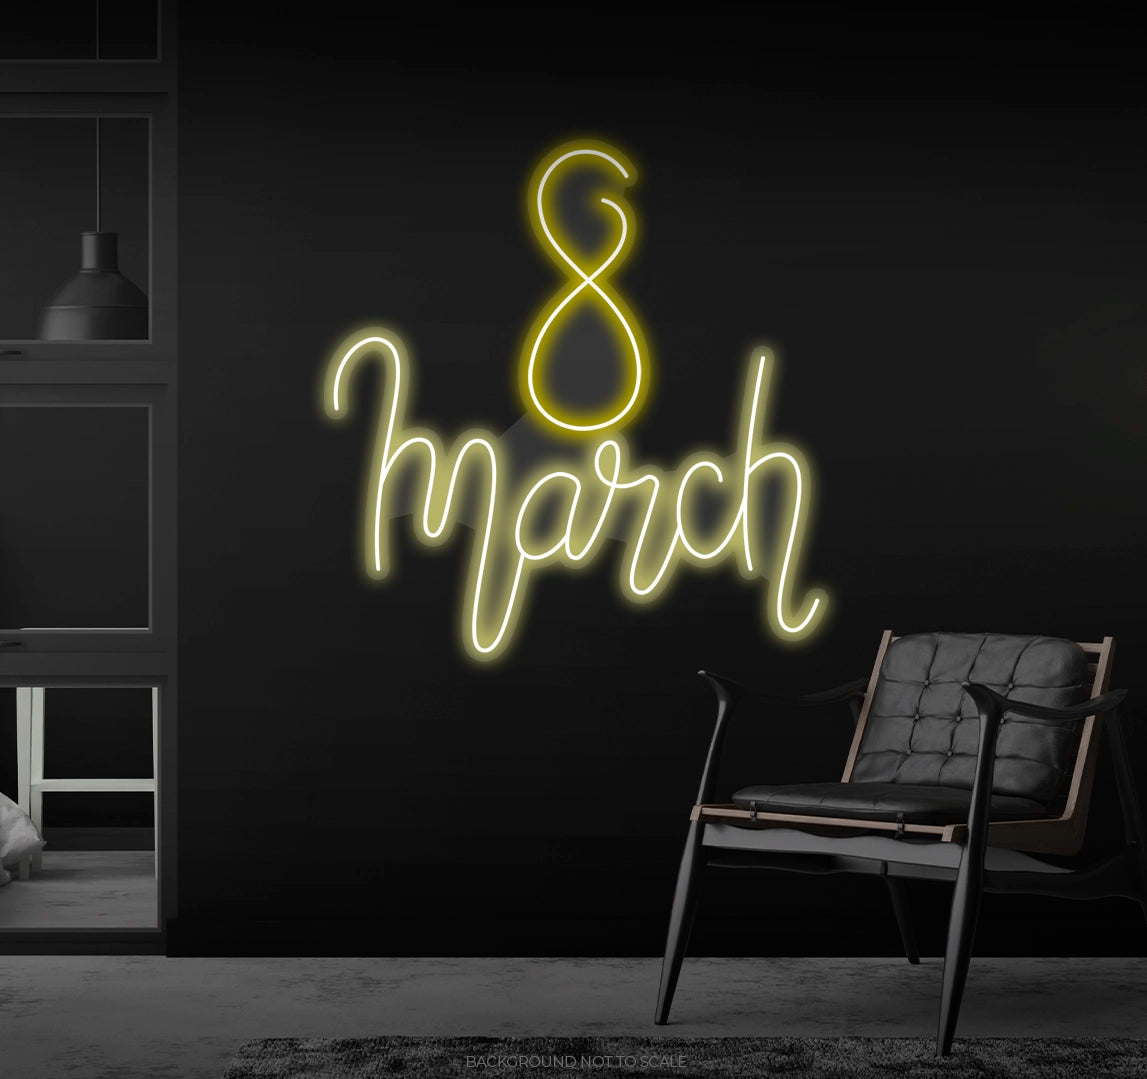 8 march handwriting LED neon